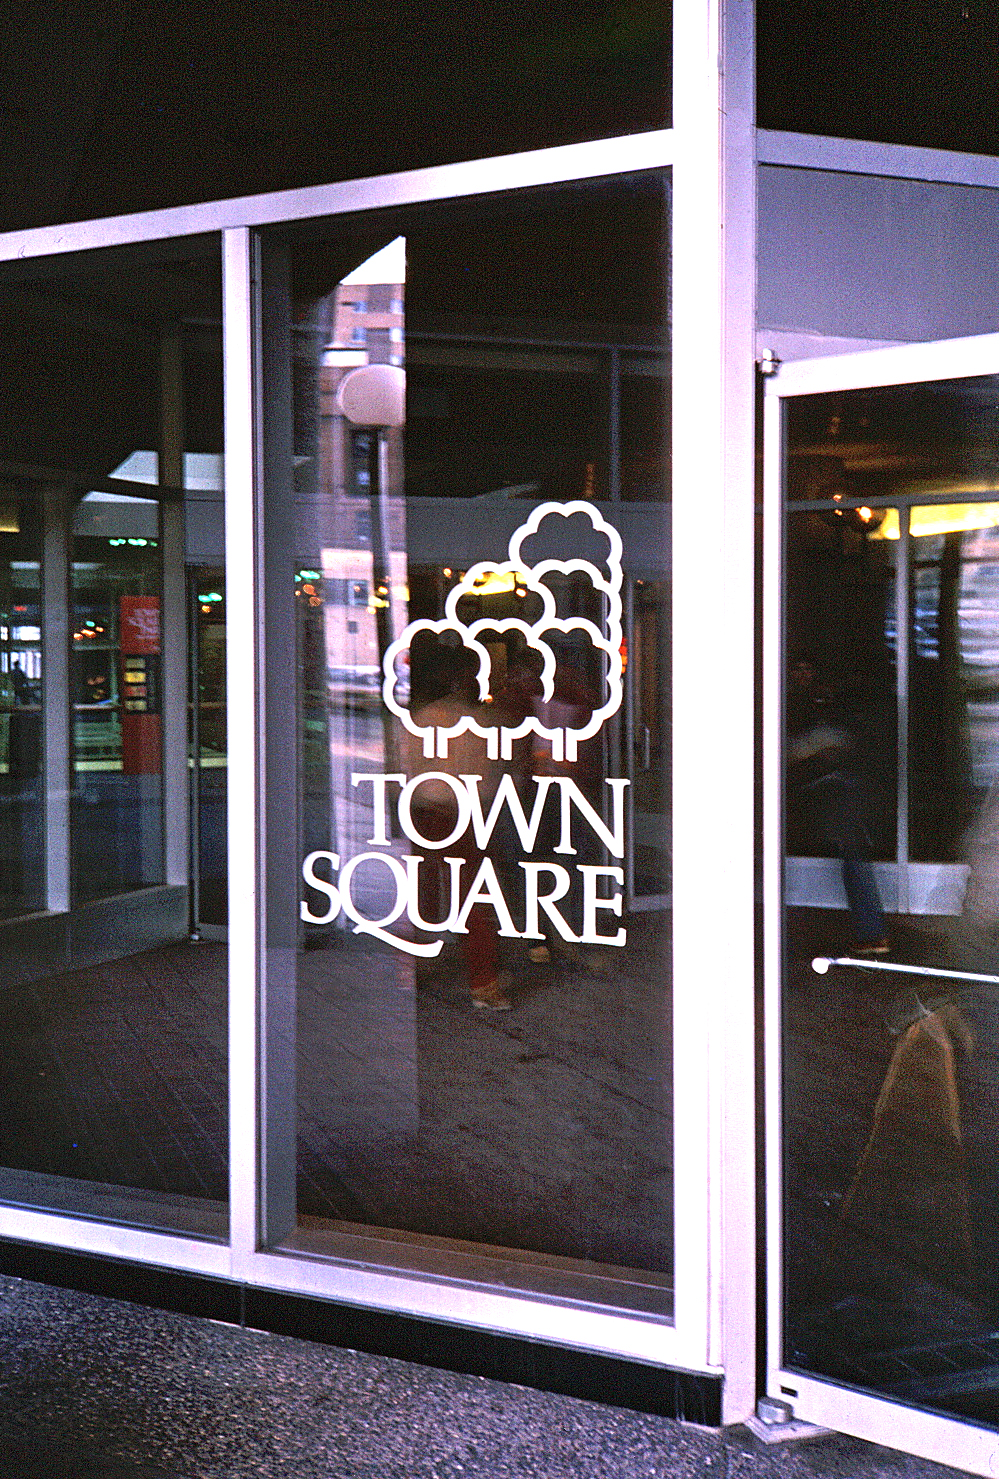 Logo and typeface signature etched on a large glass window in the public park.